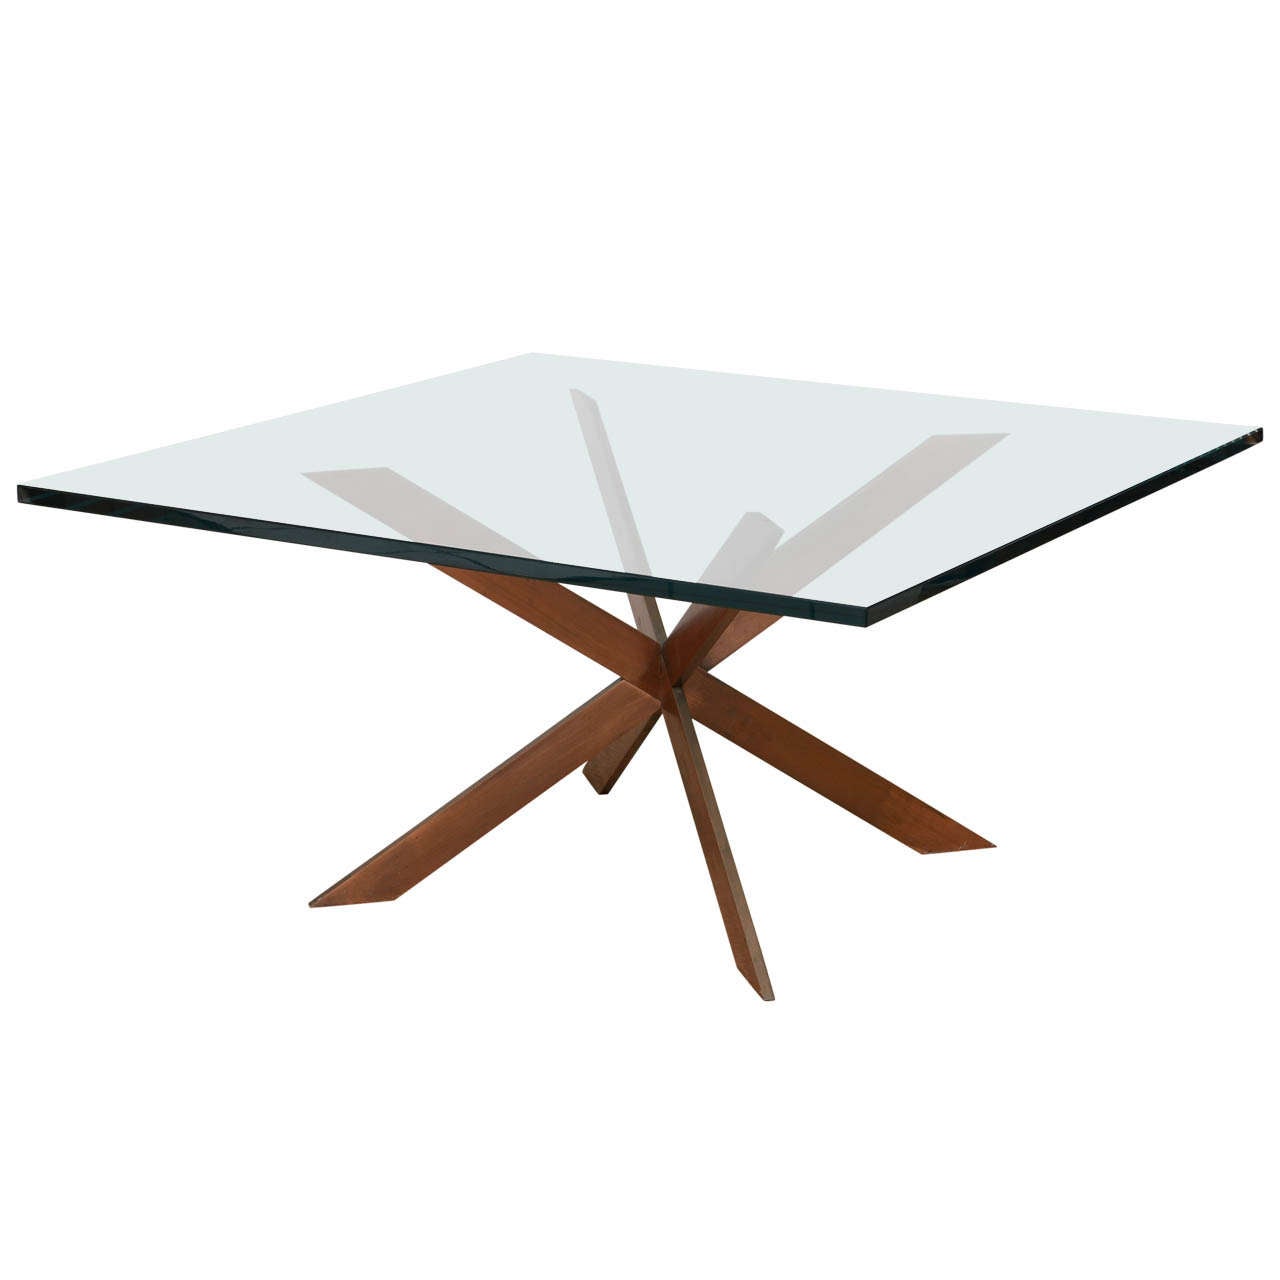 Leon Rosen attributed Double Cross Copper Coffee Table, Pace